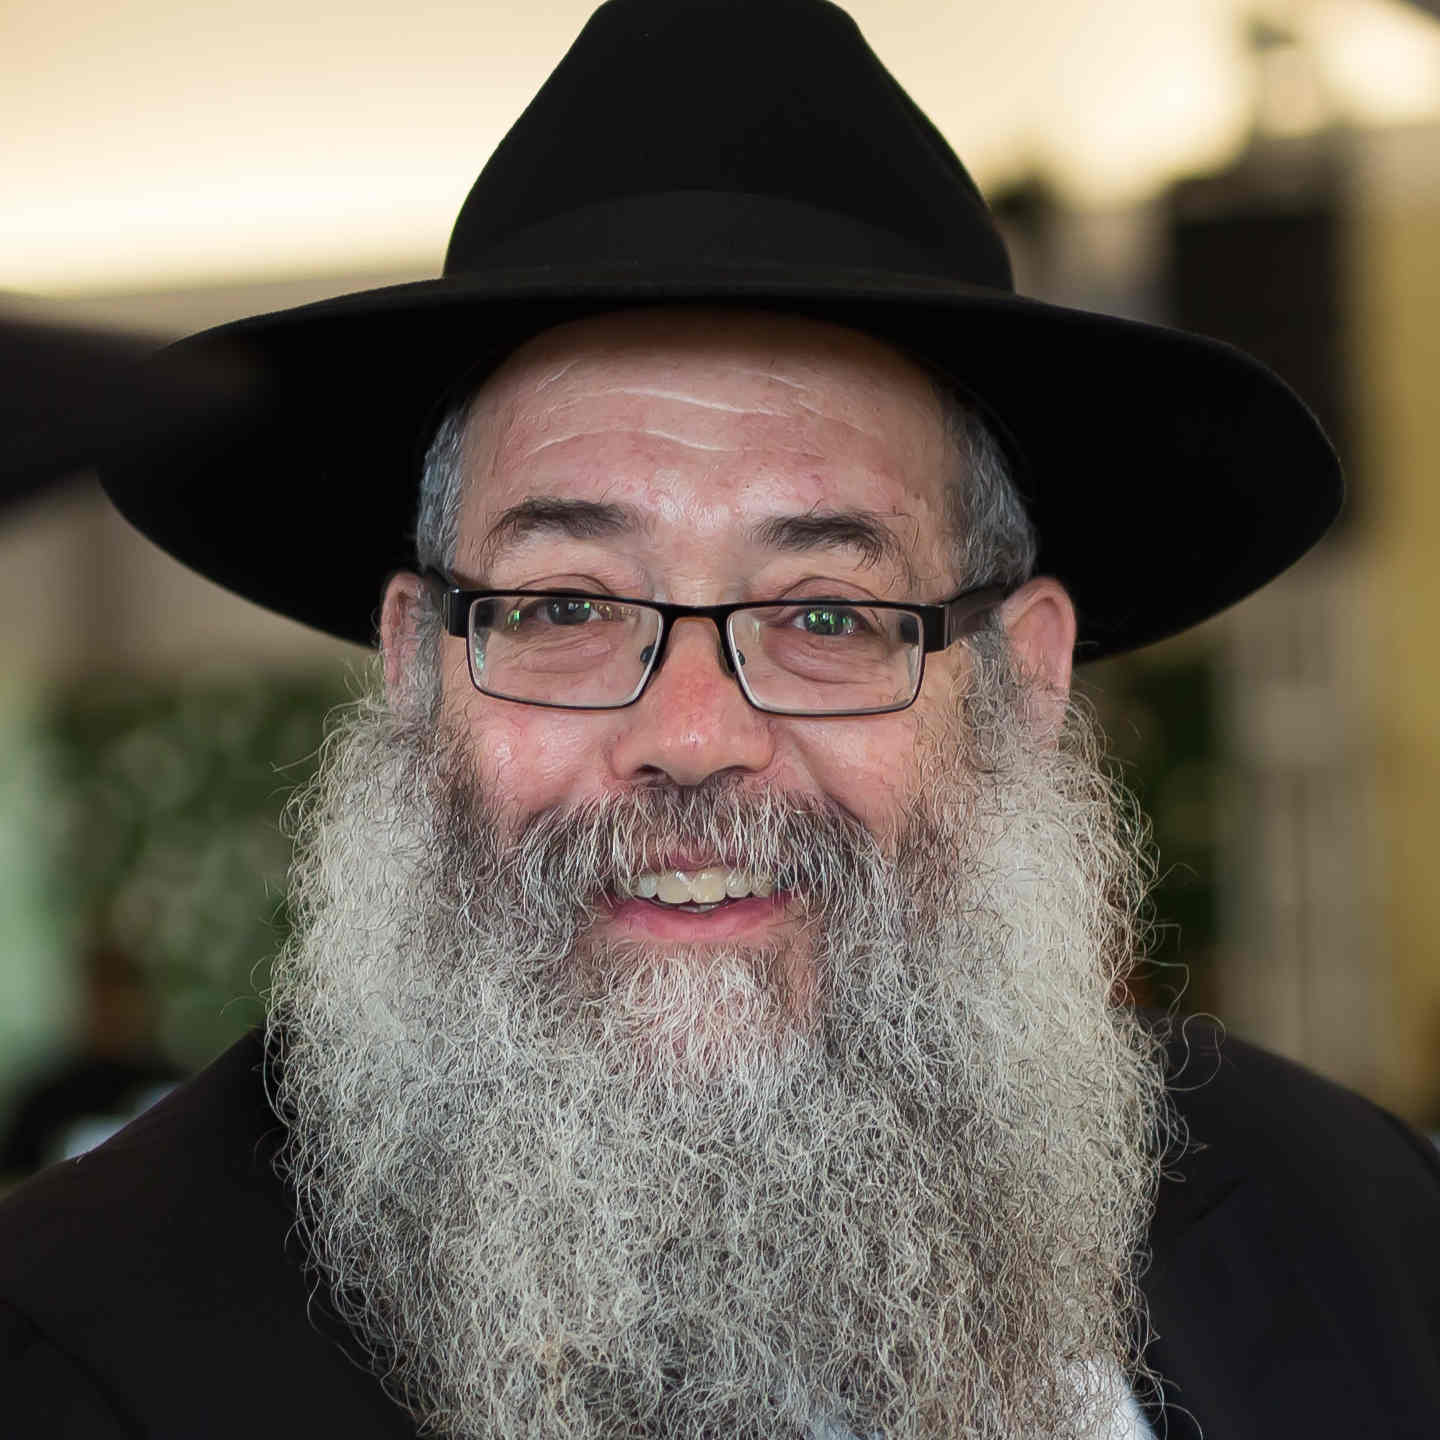 Rulings and insights from the Lubavitcher Rebbe - Rabbi Chaim Wolosow